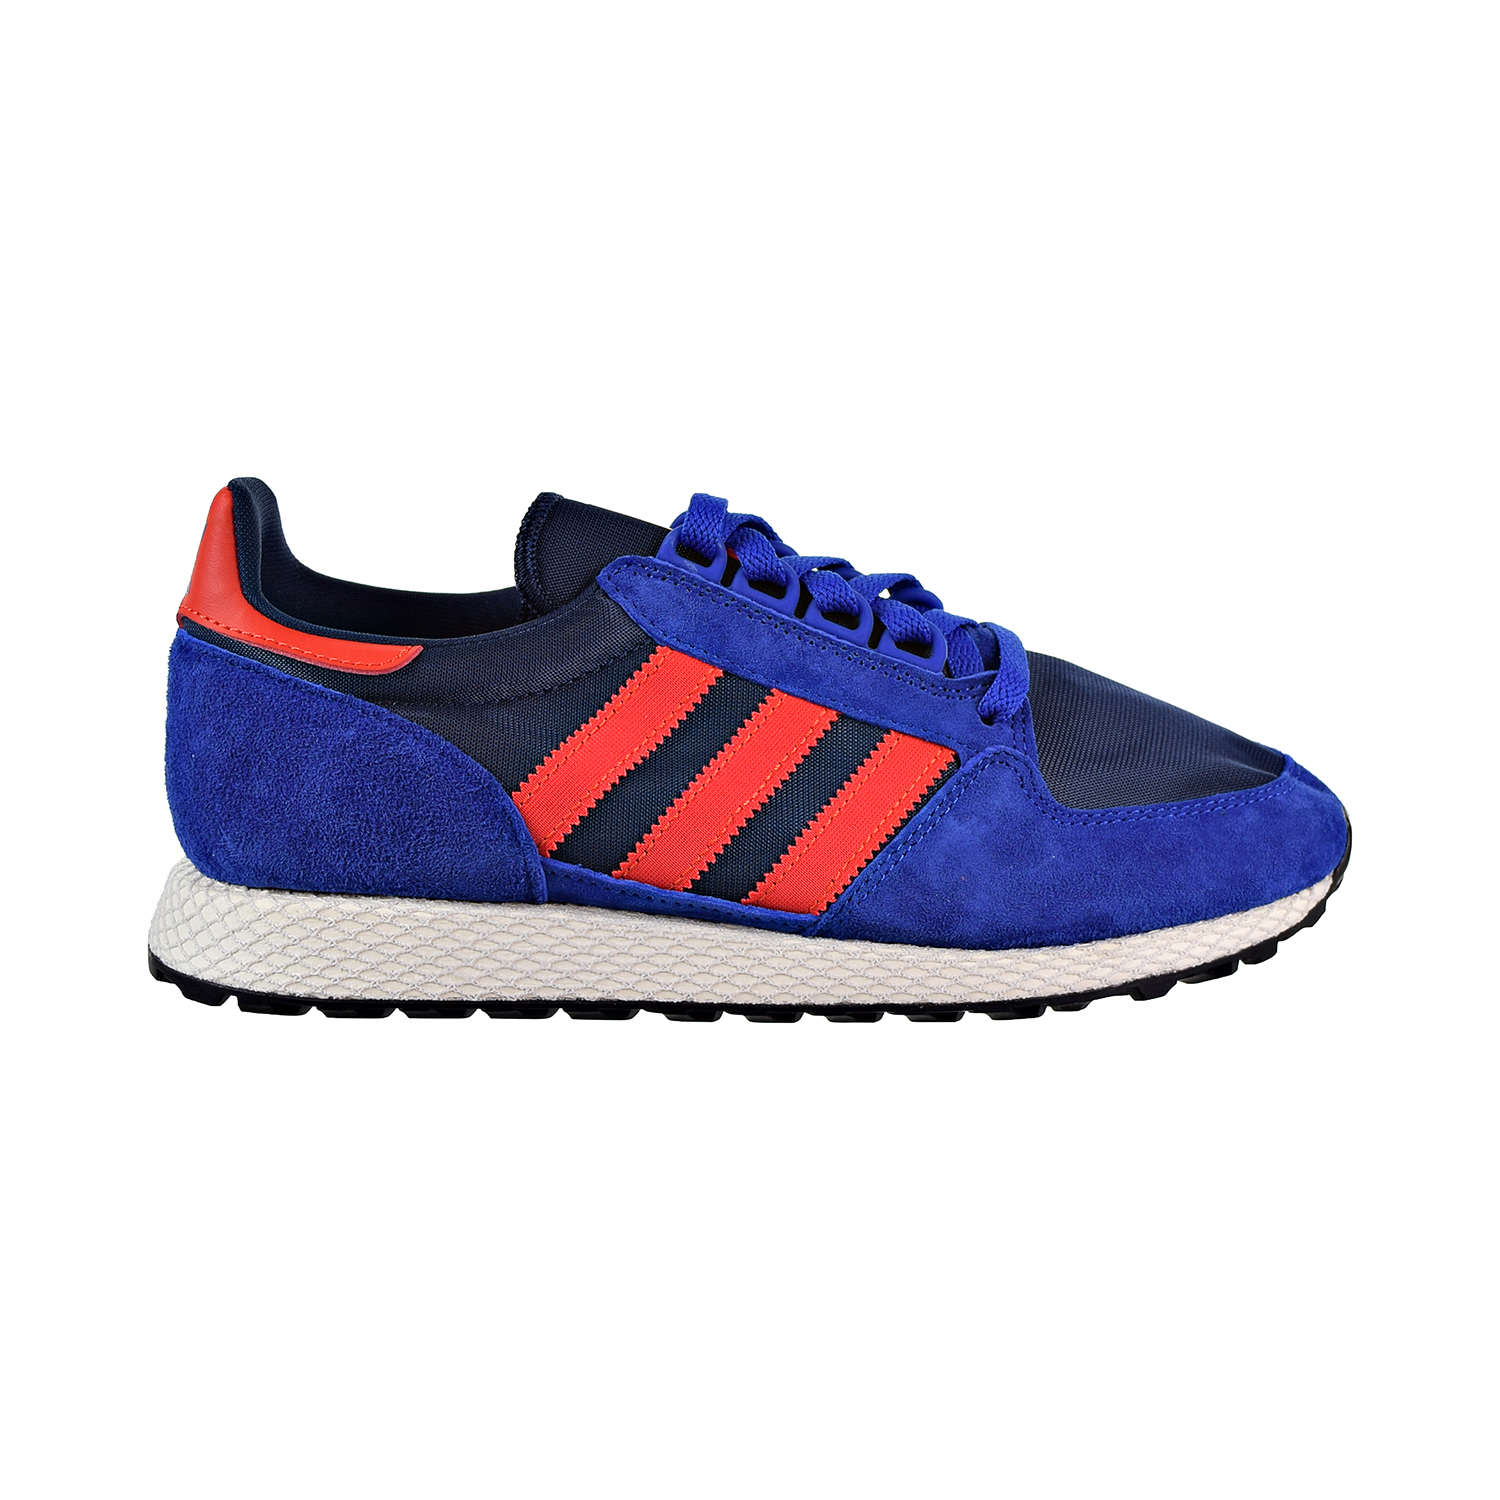 adidas forest grove blue red